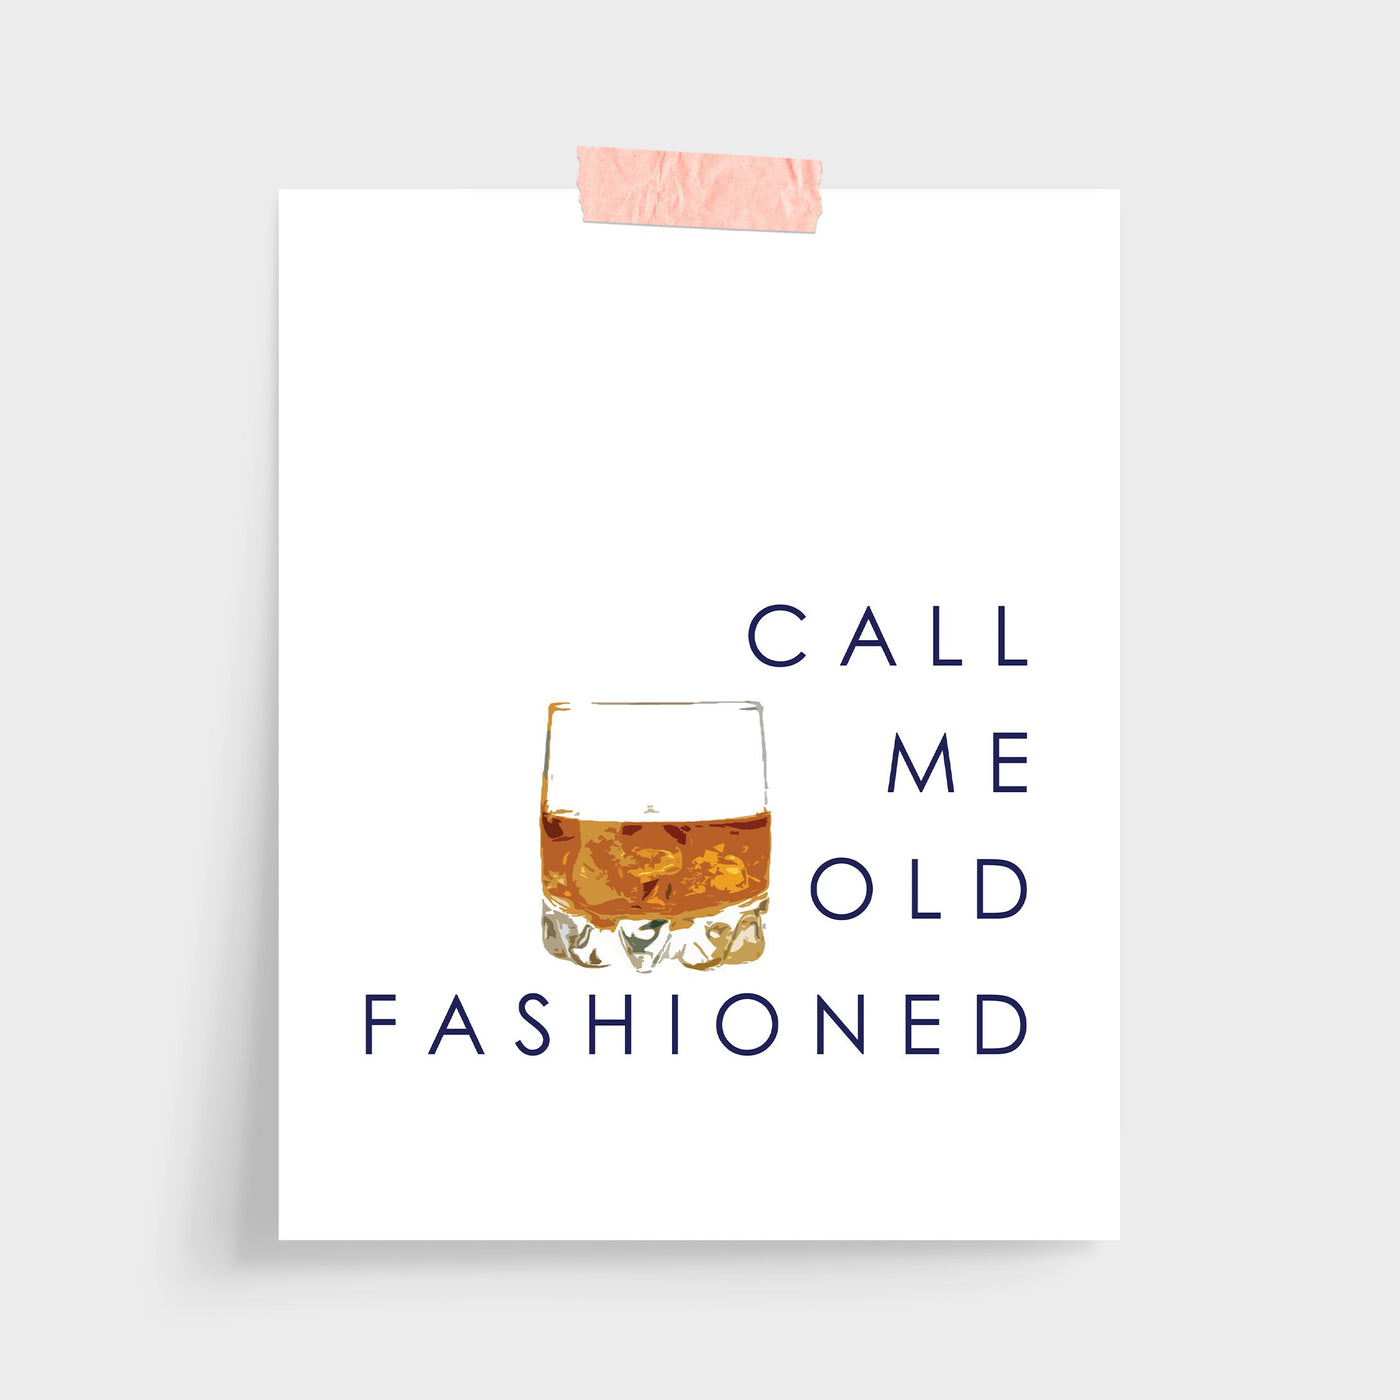 Call Me Old Fashioned Print Gallery Print 5x7 / Unframed Katie Kime